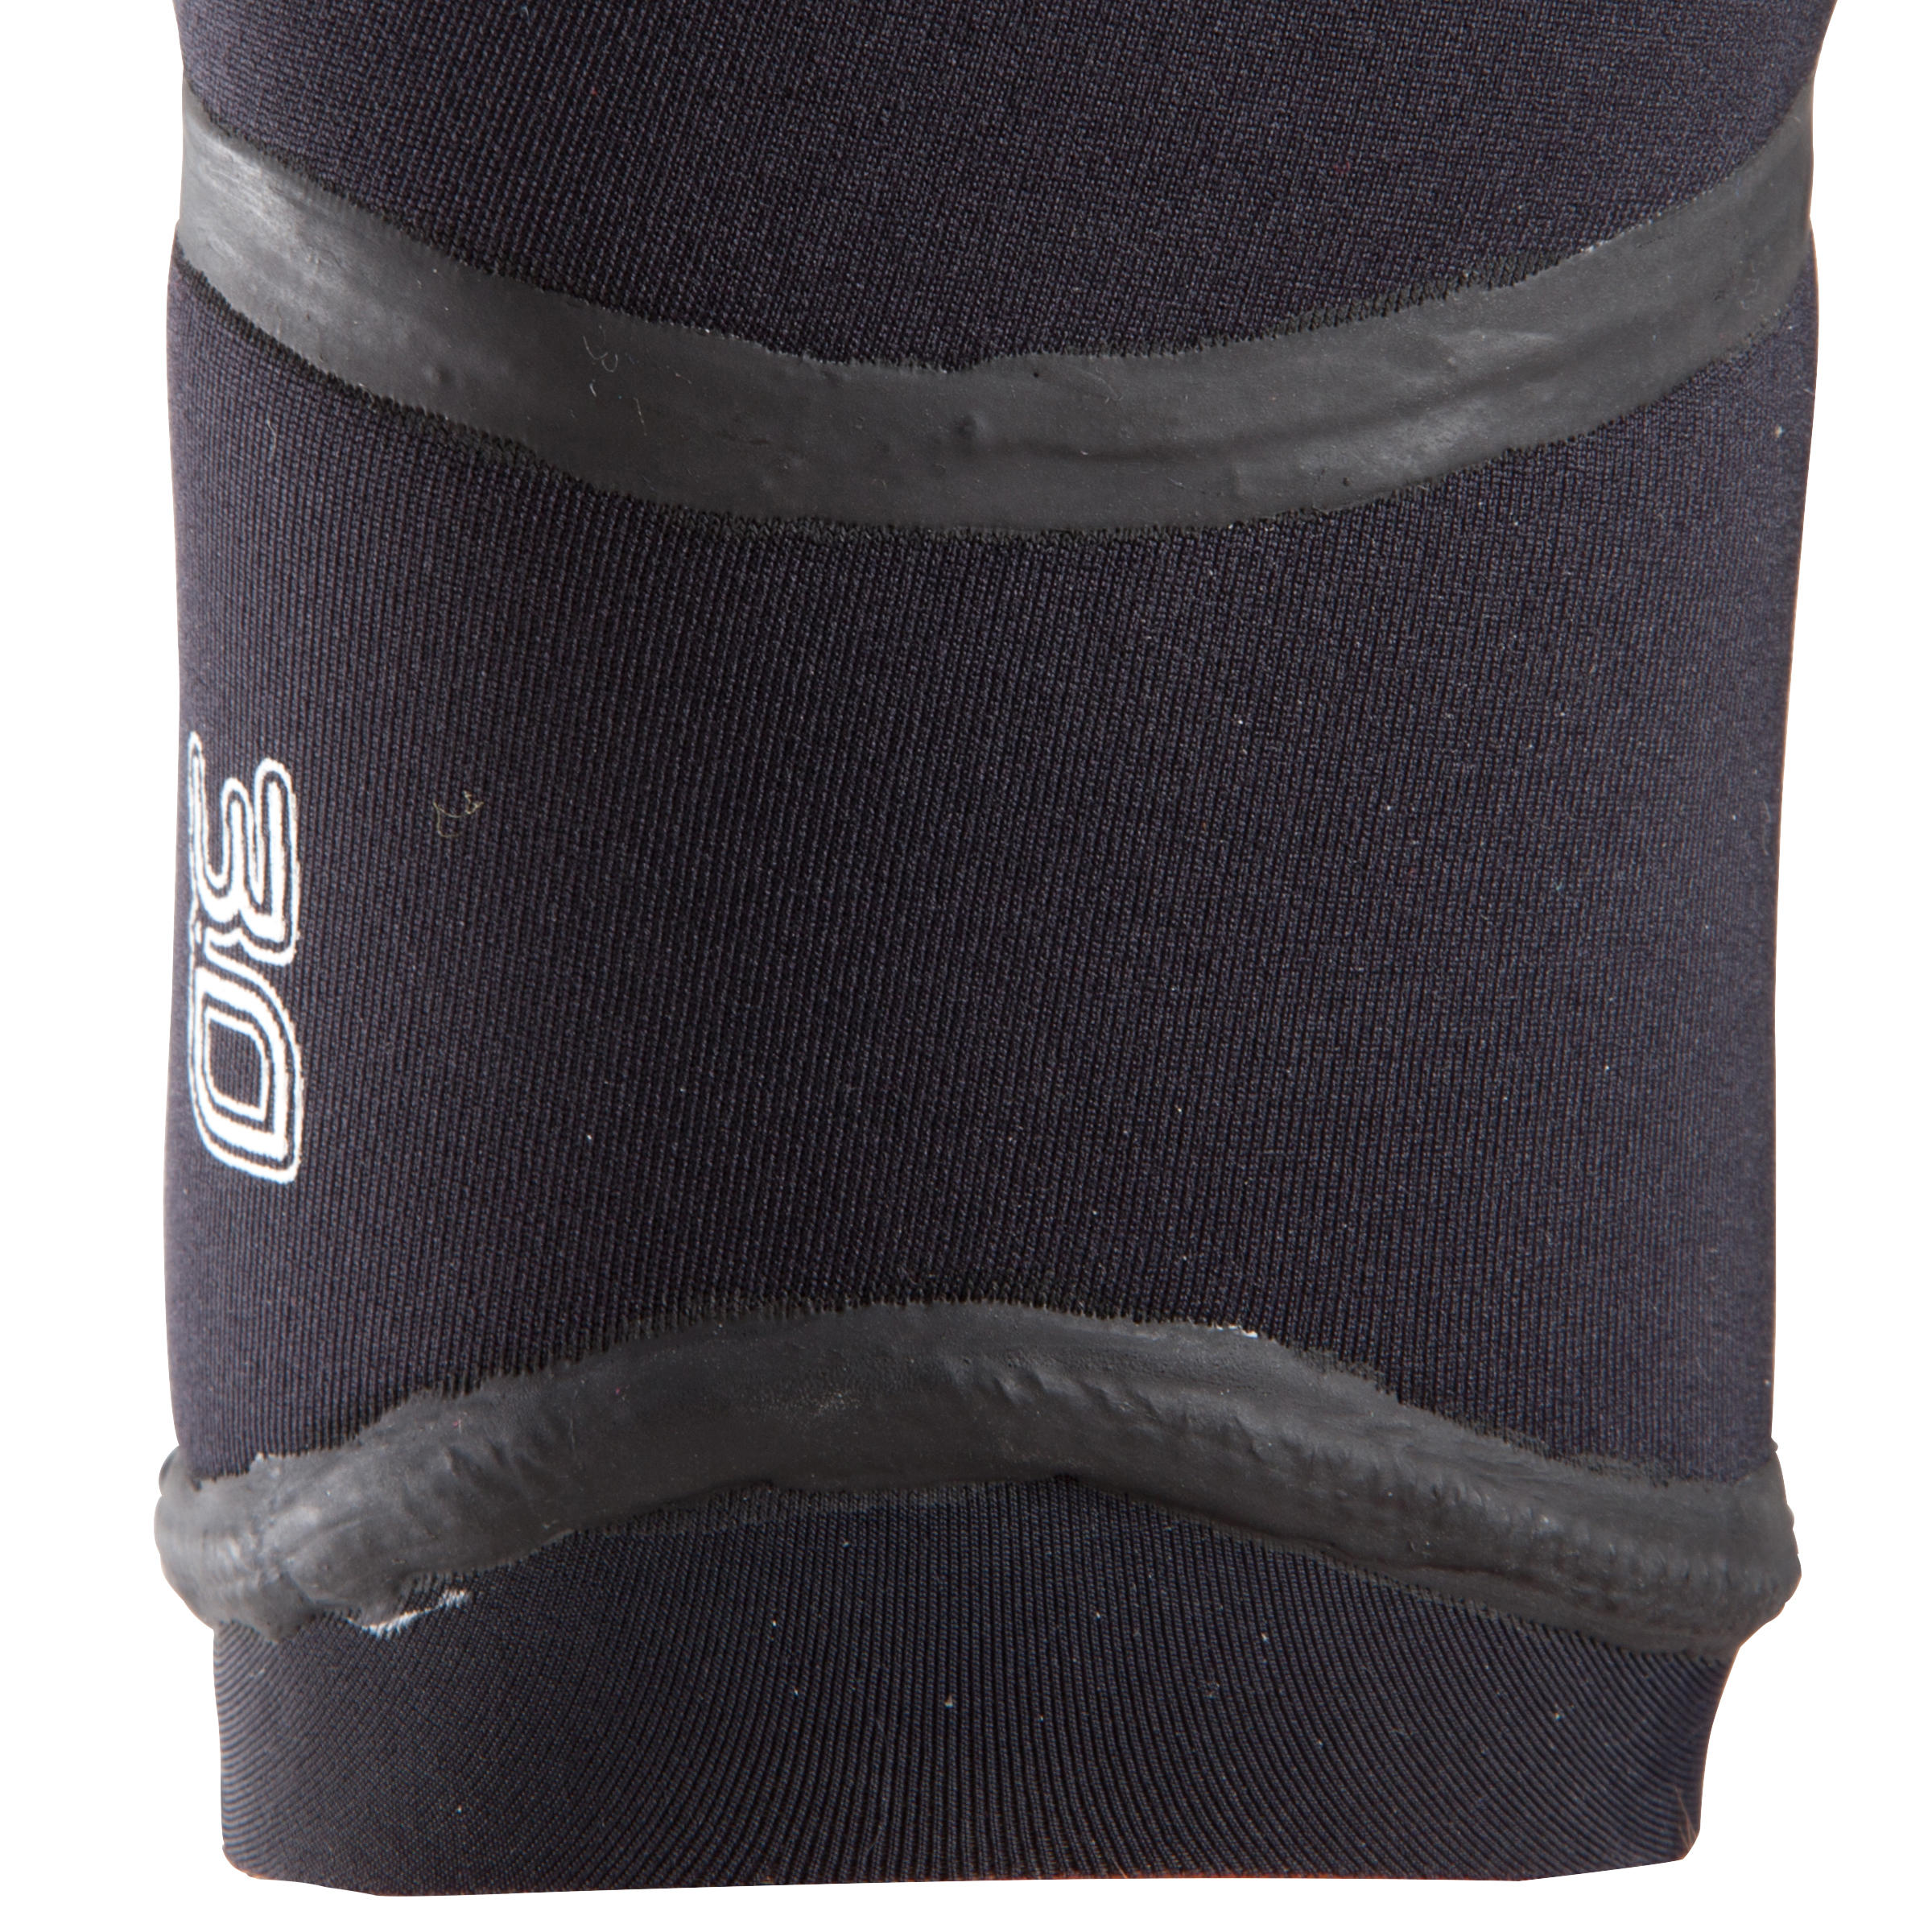 3 mm Cold Water Neoprene Surfing Gloves - OLAIAN